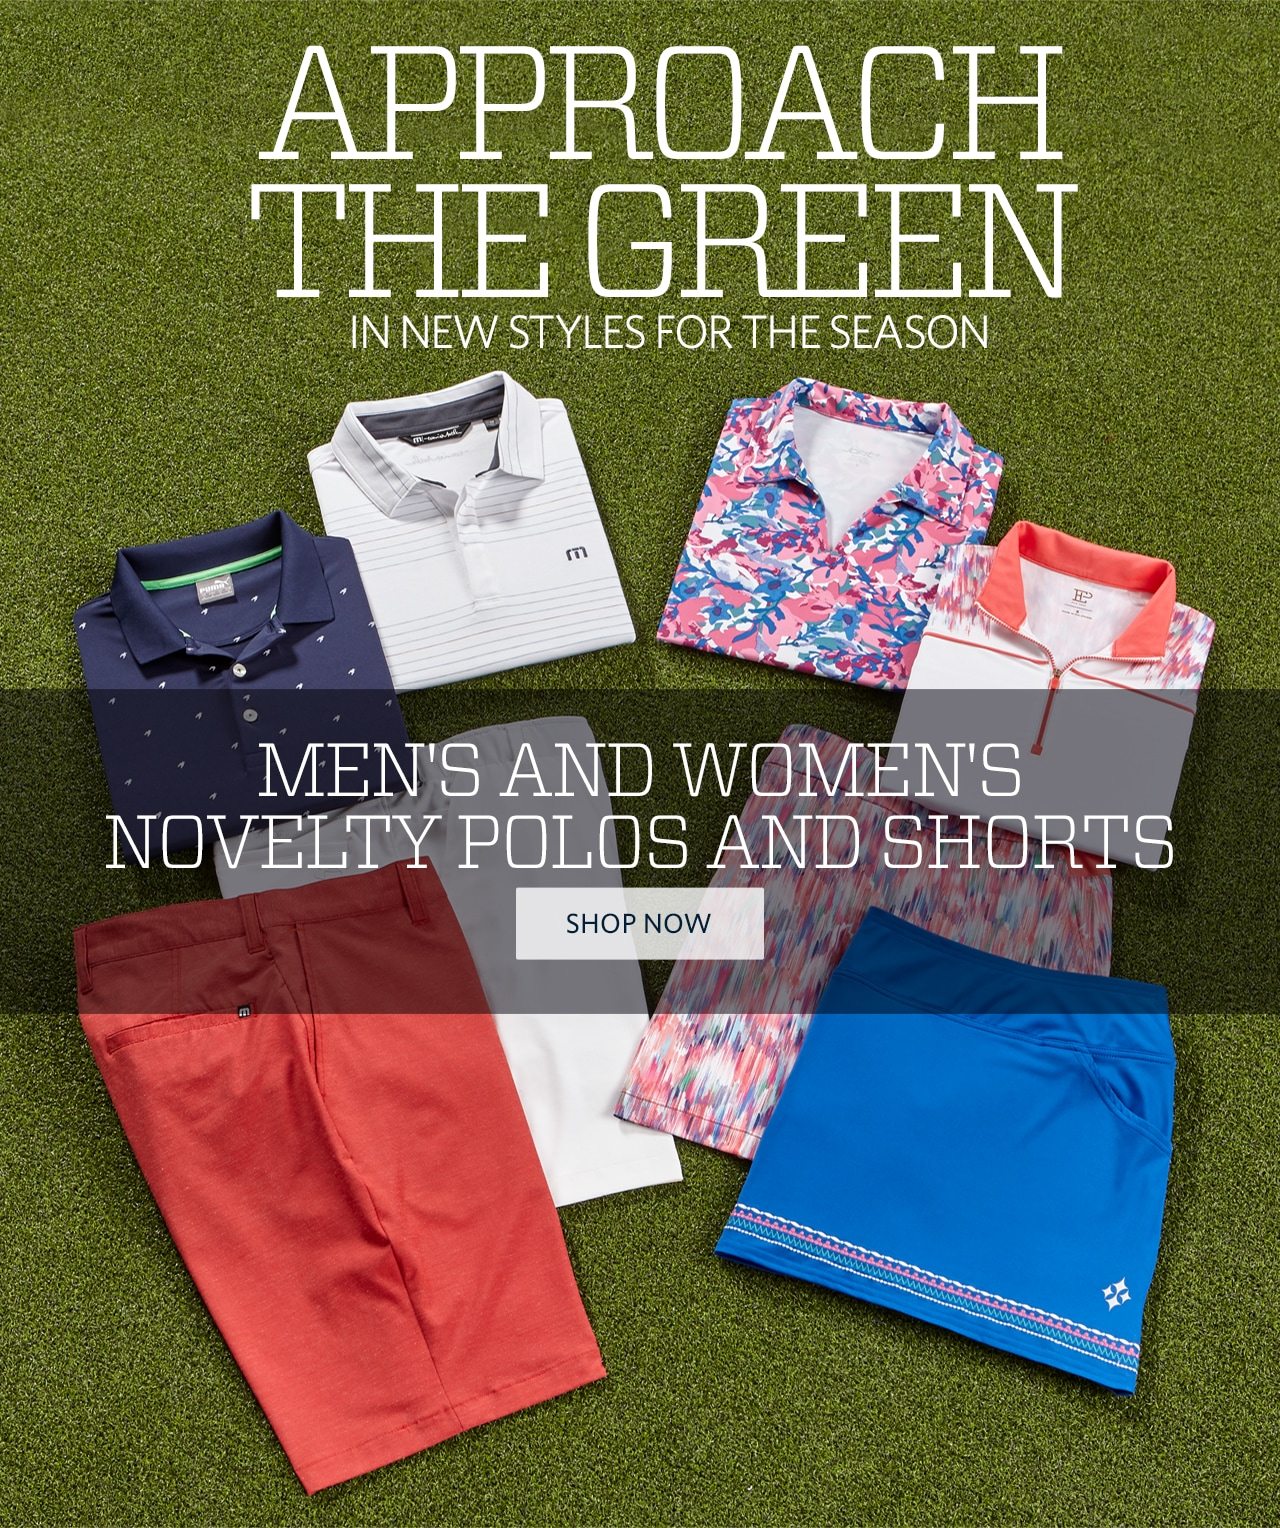 Approach the Green In New Styles For The Season. Men's and Women's Novelty Polos and Shorts. Shop Now